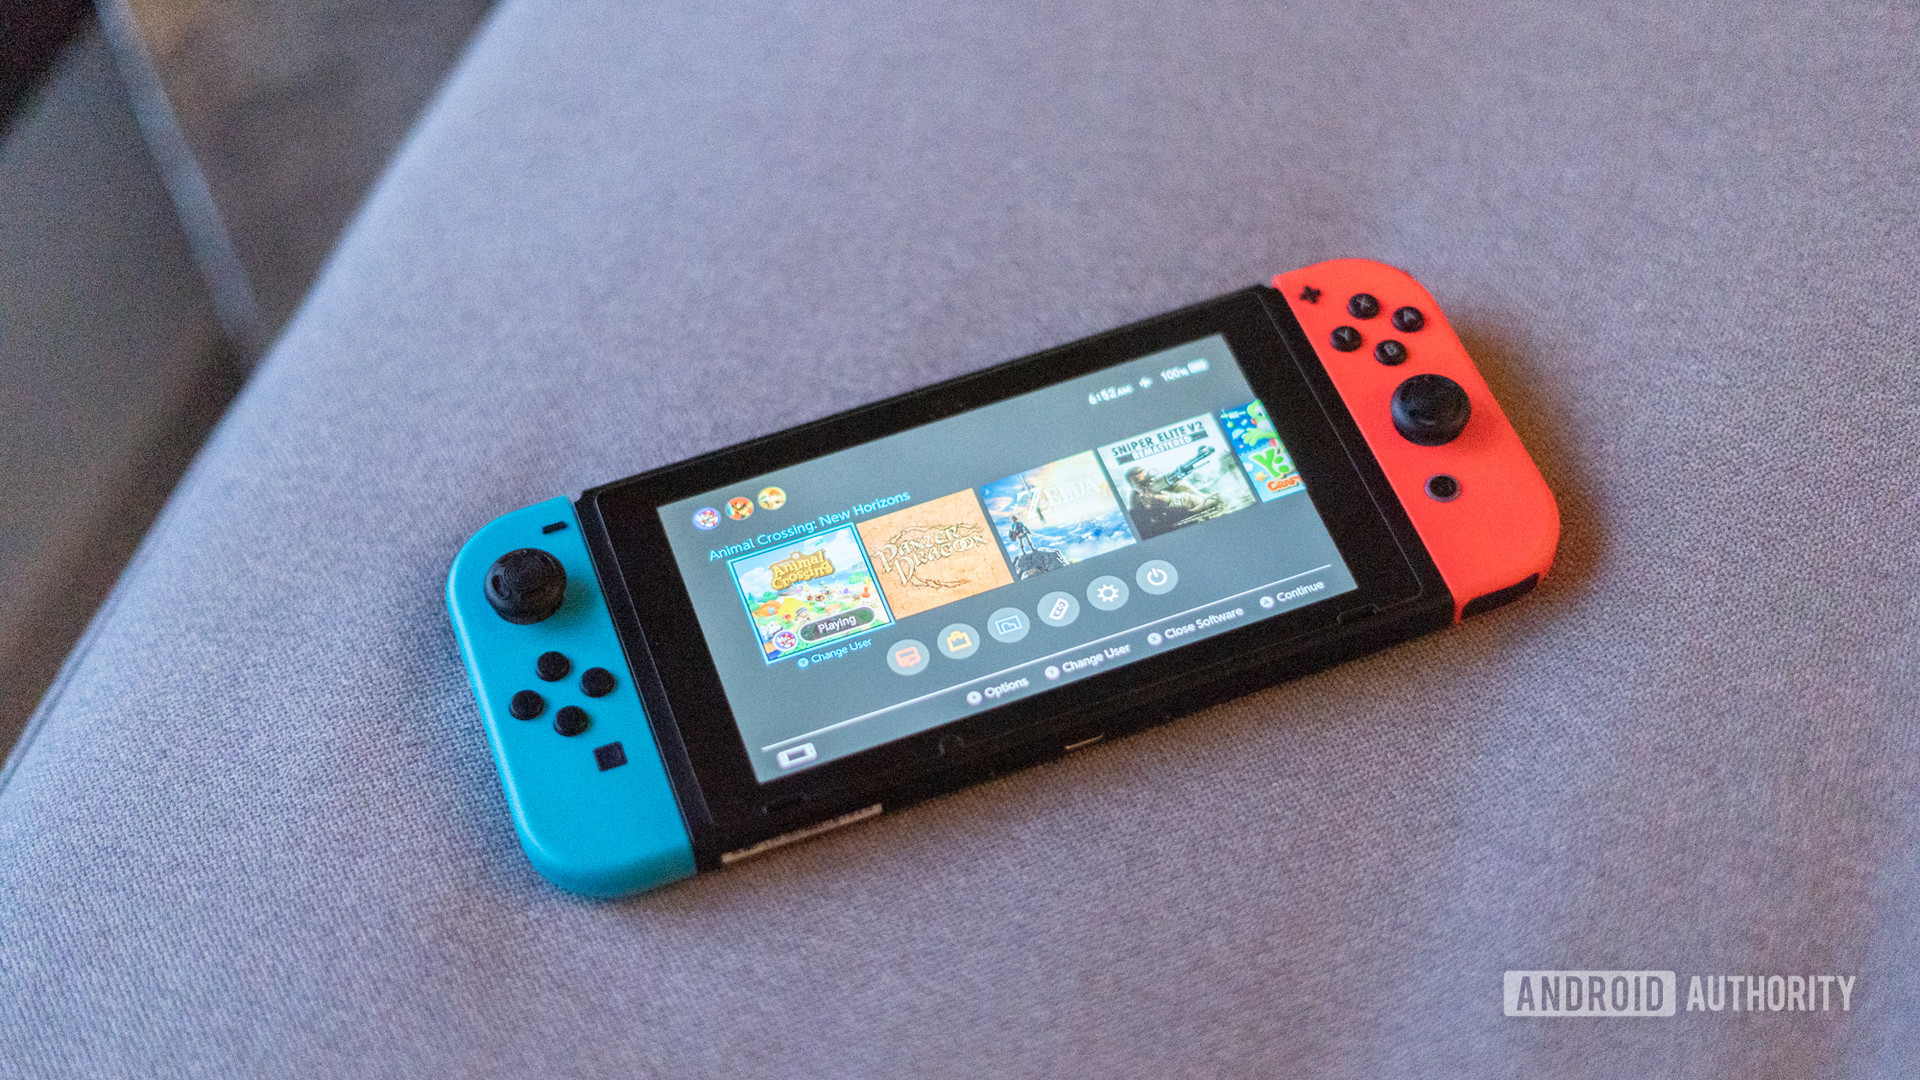 The best free Nintendo Switch games - Android Authority